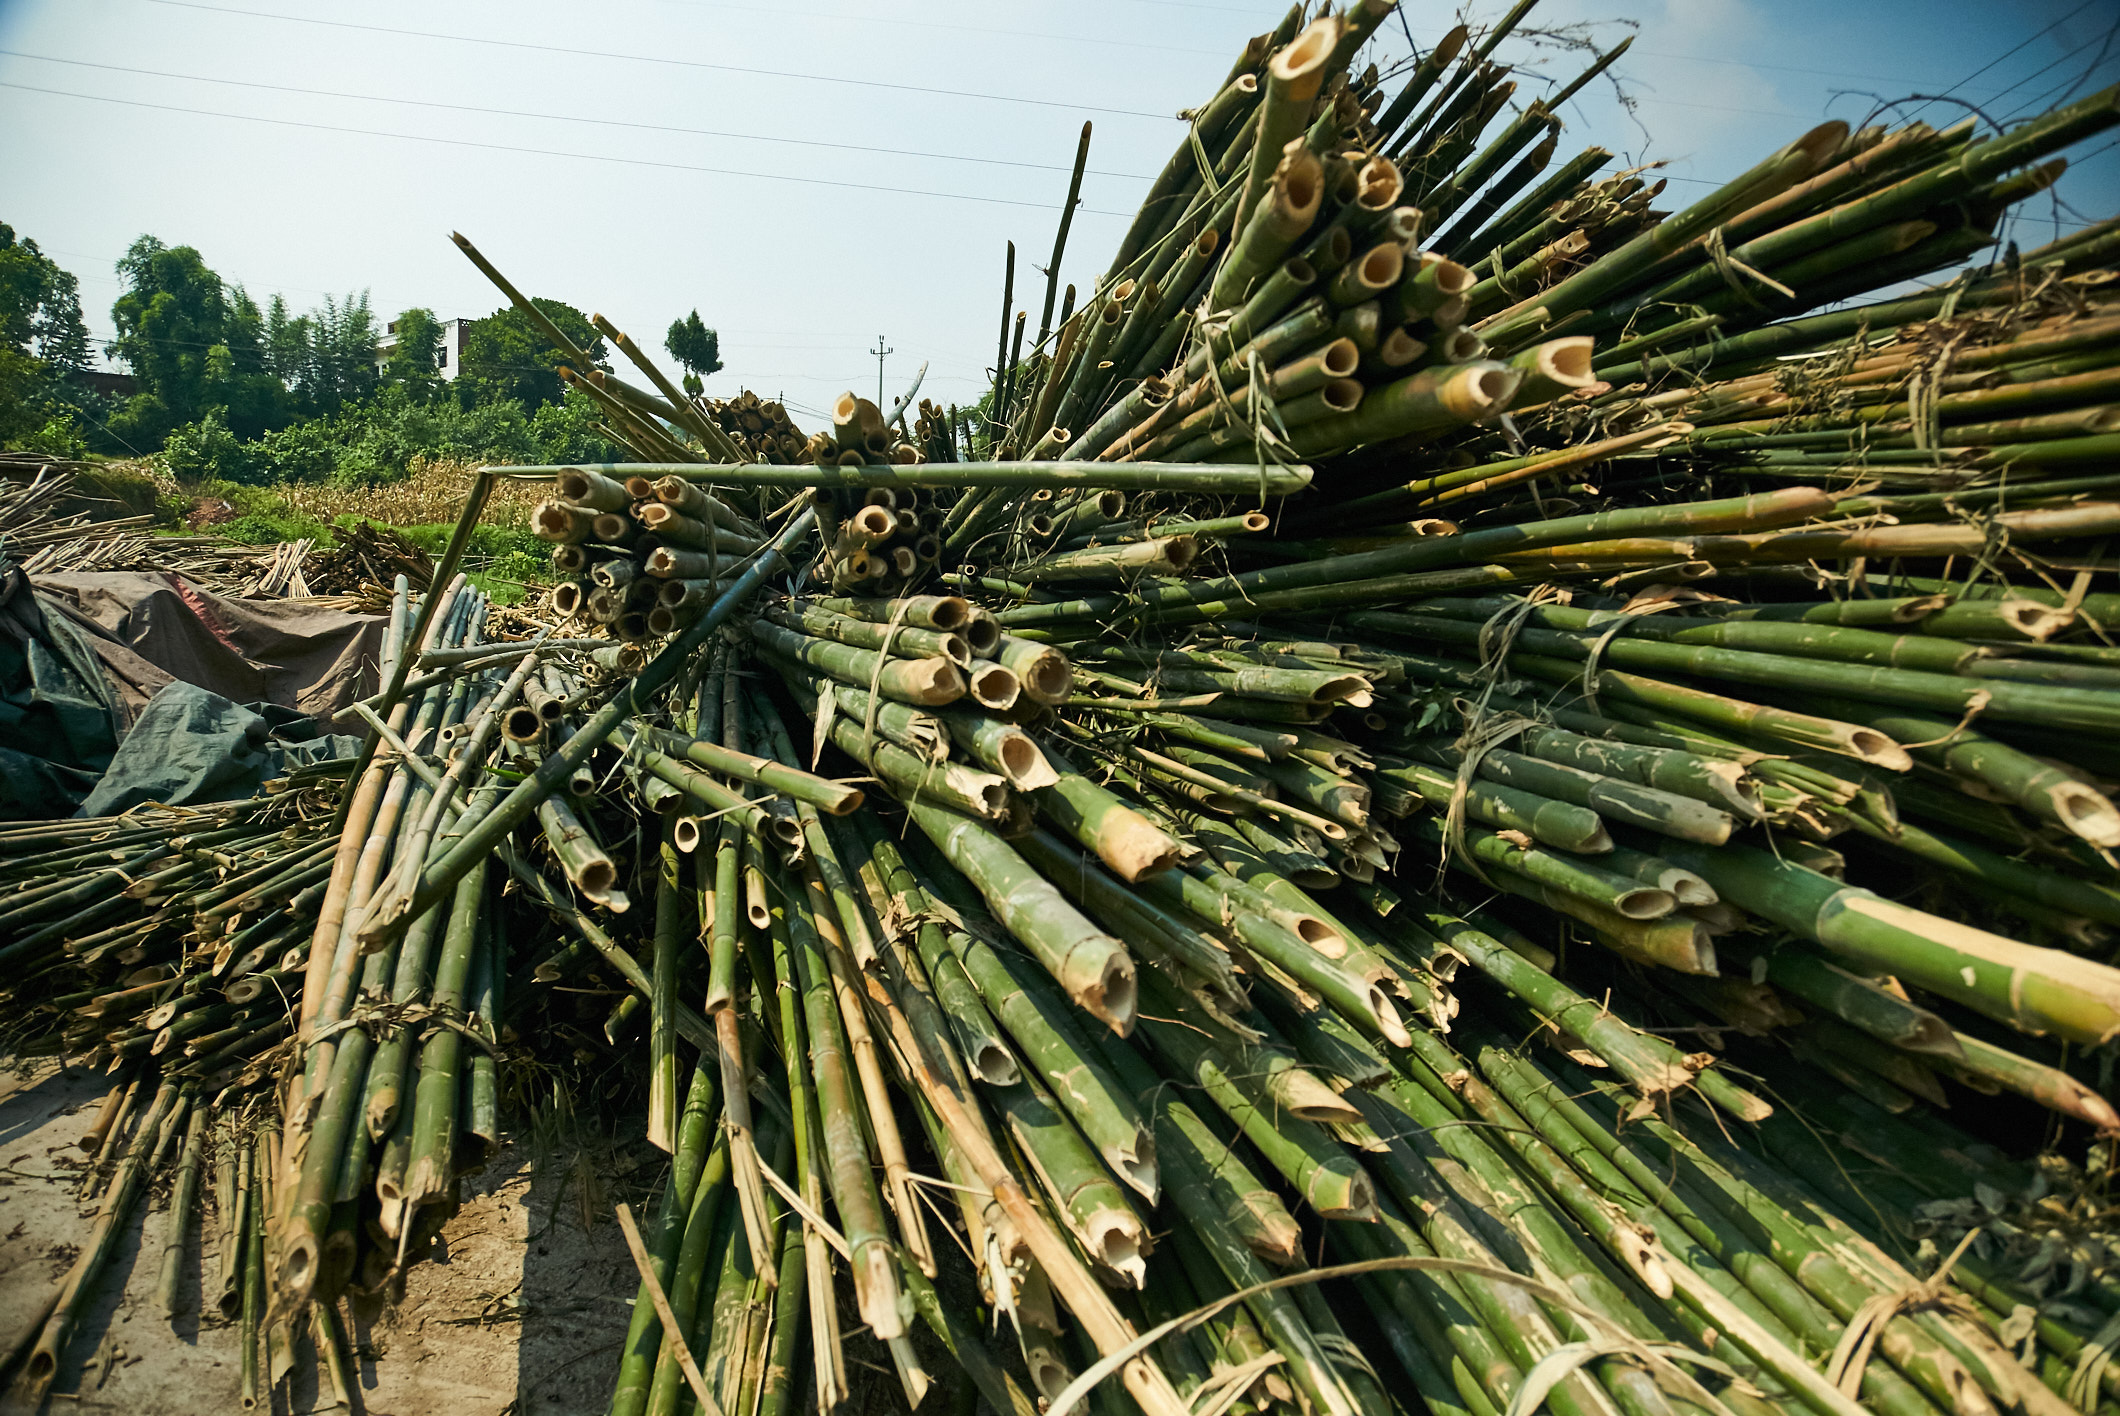 The time to harvest bamboo properly is the end of rainy season - early dry season